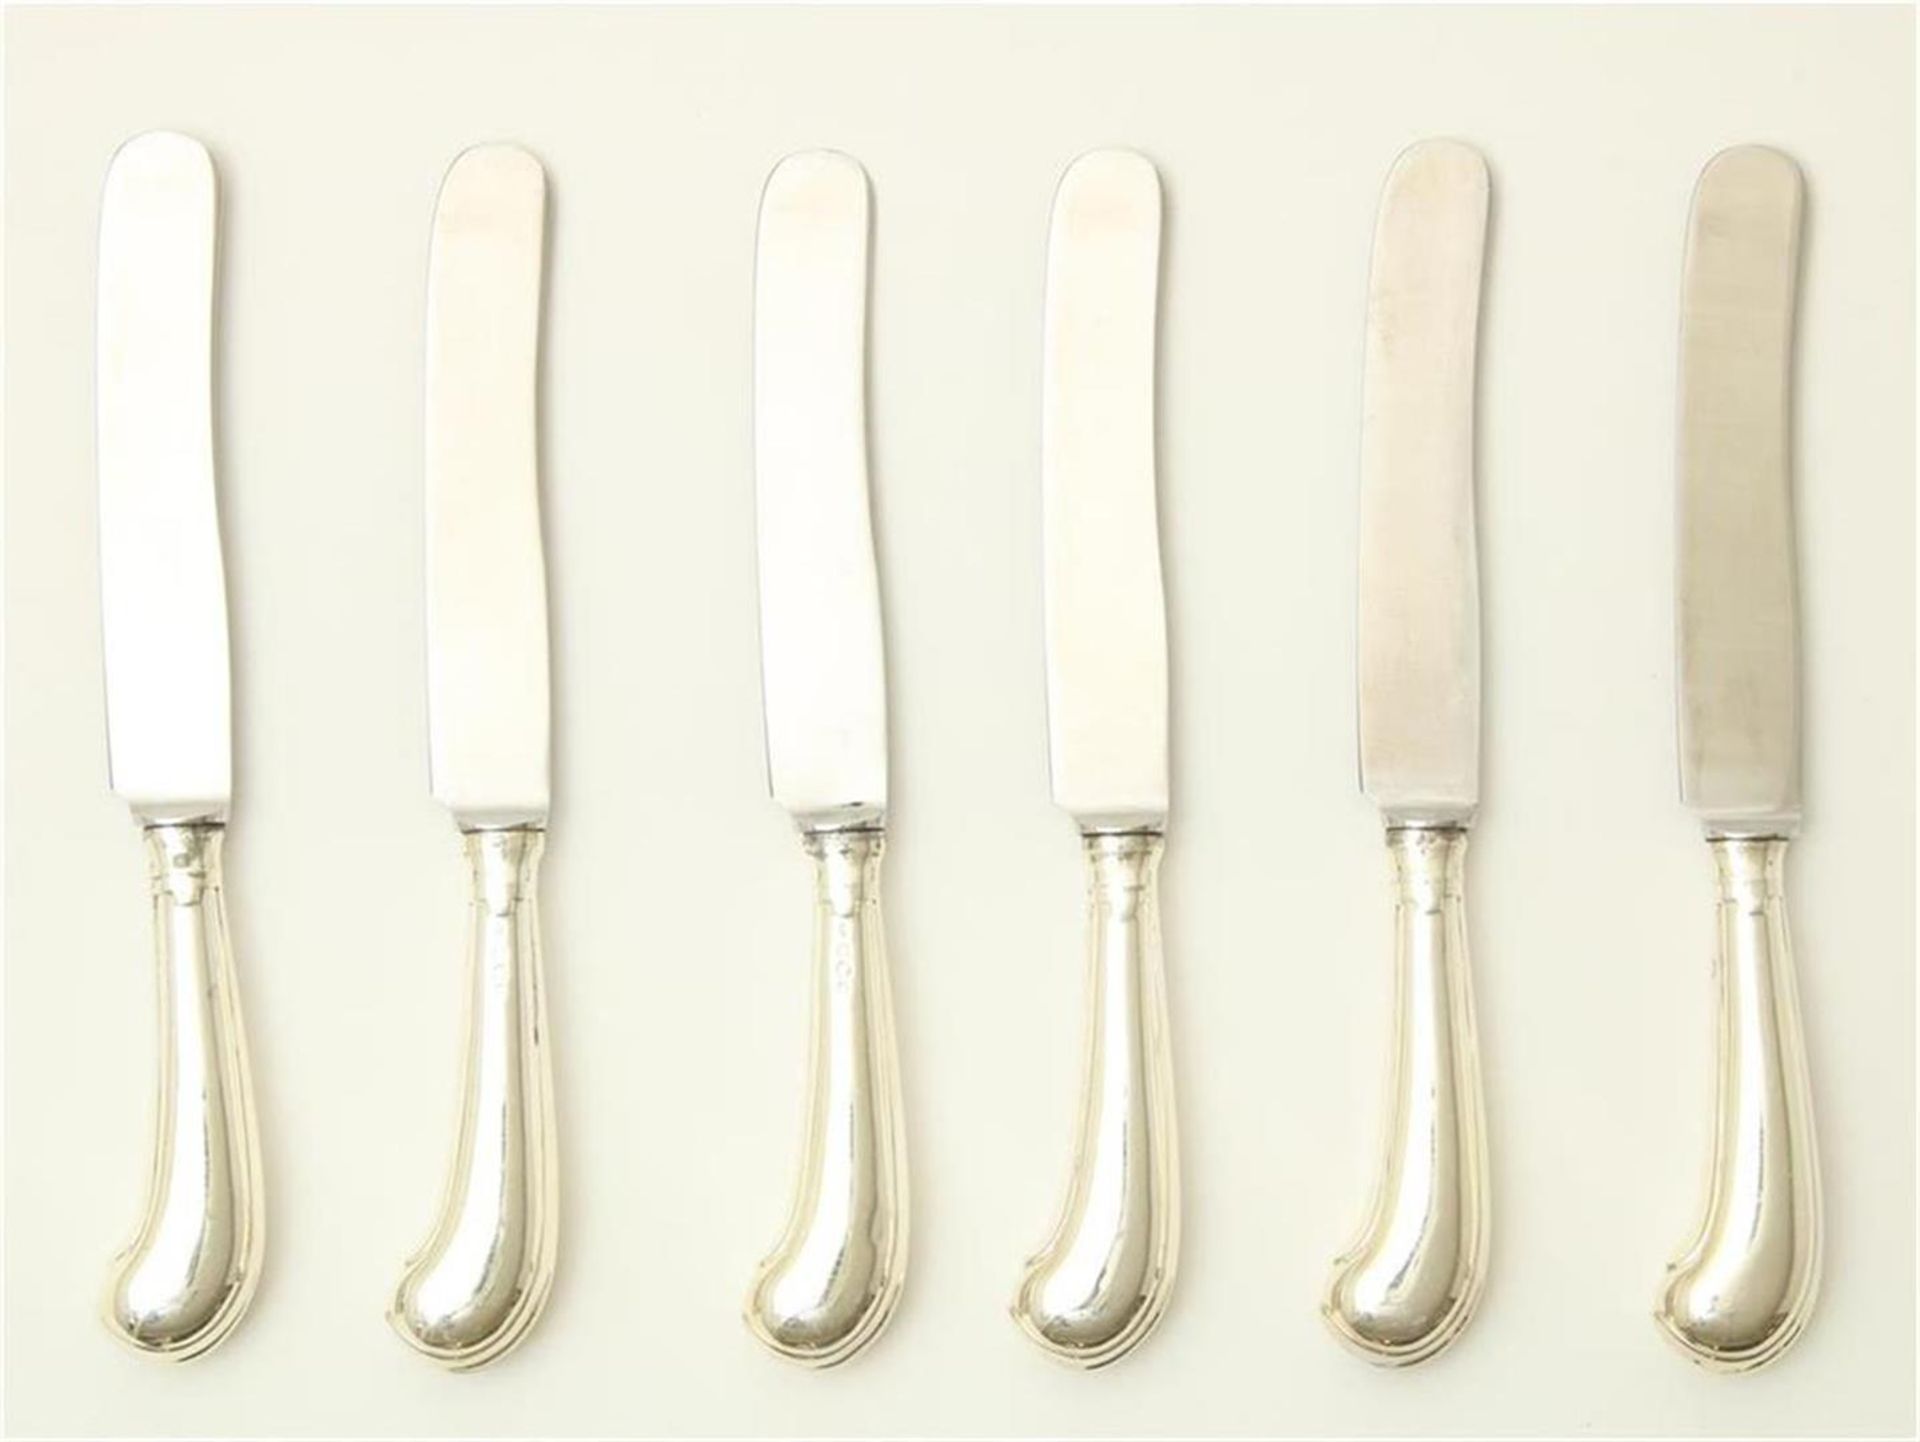 Series of 6 knives with silver pistol handles, grade 835/000, gross weight 553 grams.